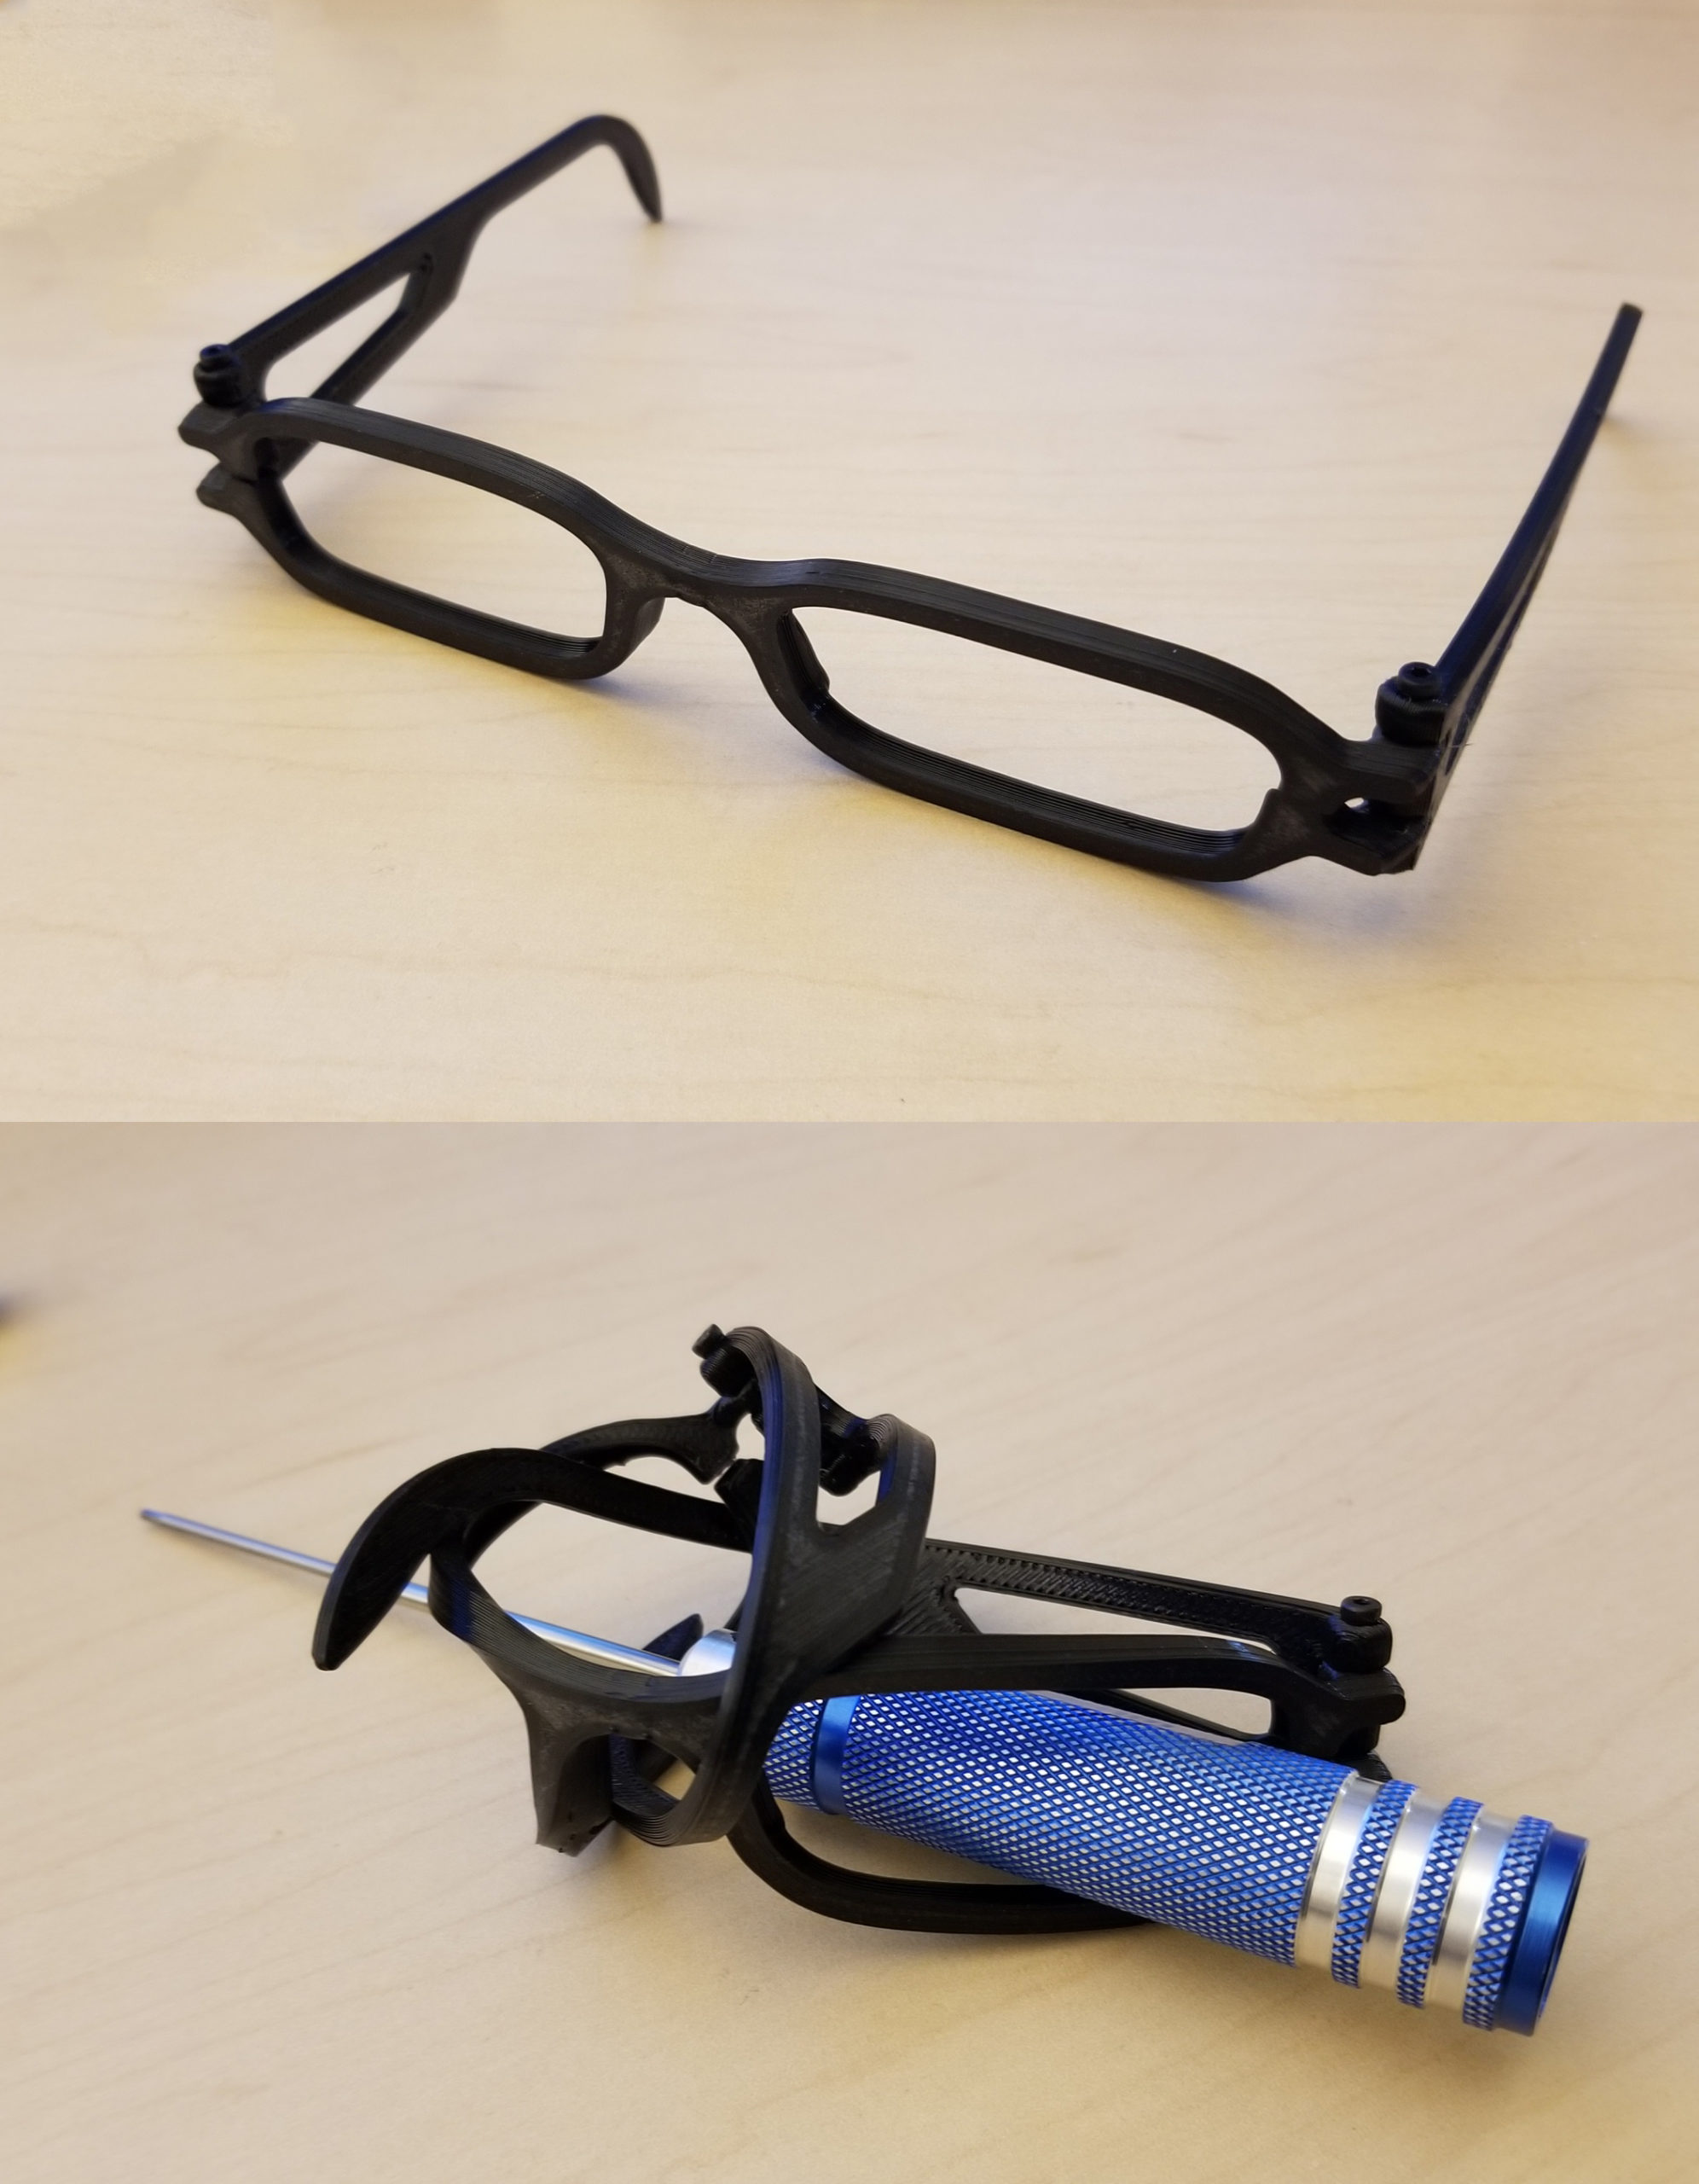 My partner used to complain that whenever I'd bump into her classes they'd need calibration again. So 3D printed a pair that could withstand bumps, drops and whatever else. 